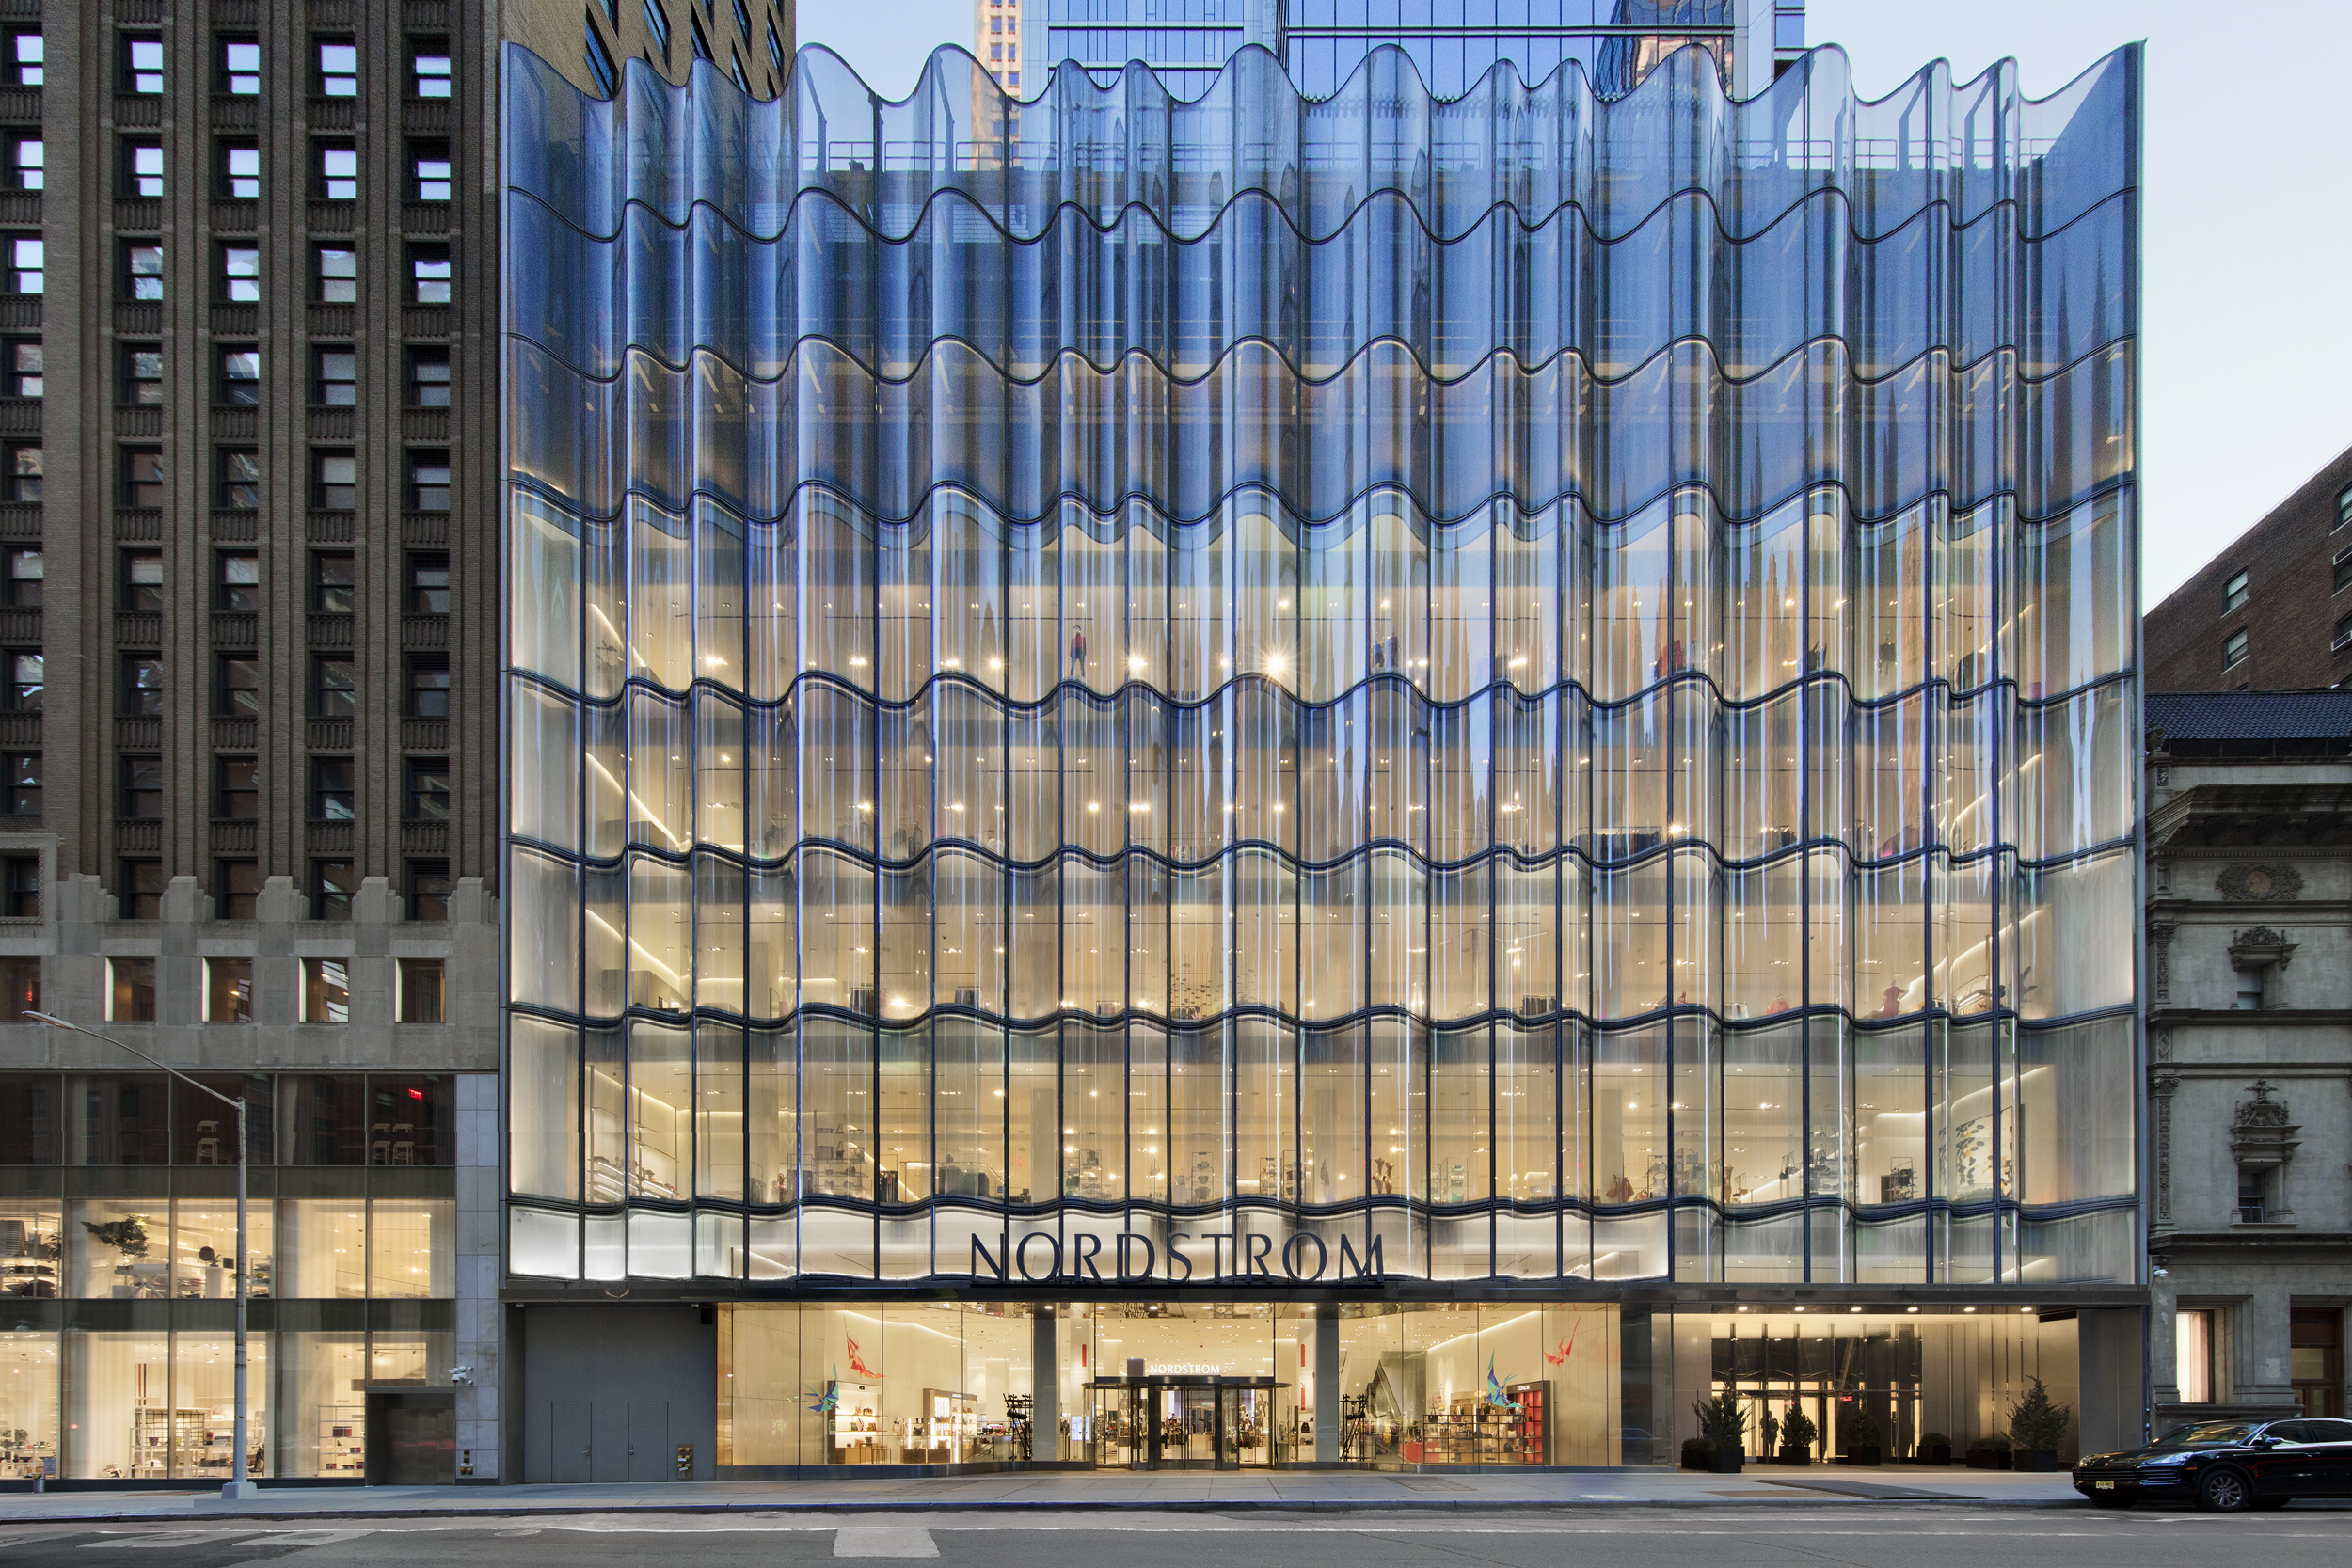 Nordstrom NYC Exterior Images – Connie Zhou